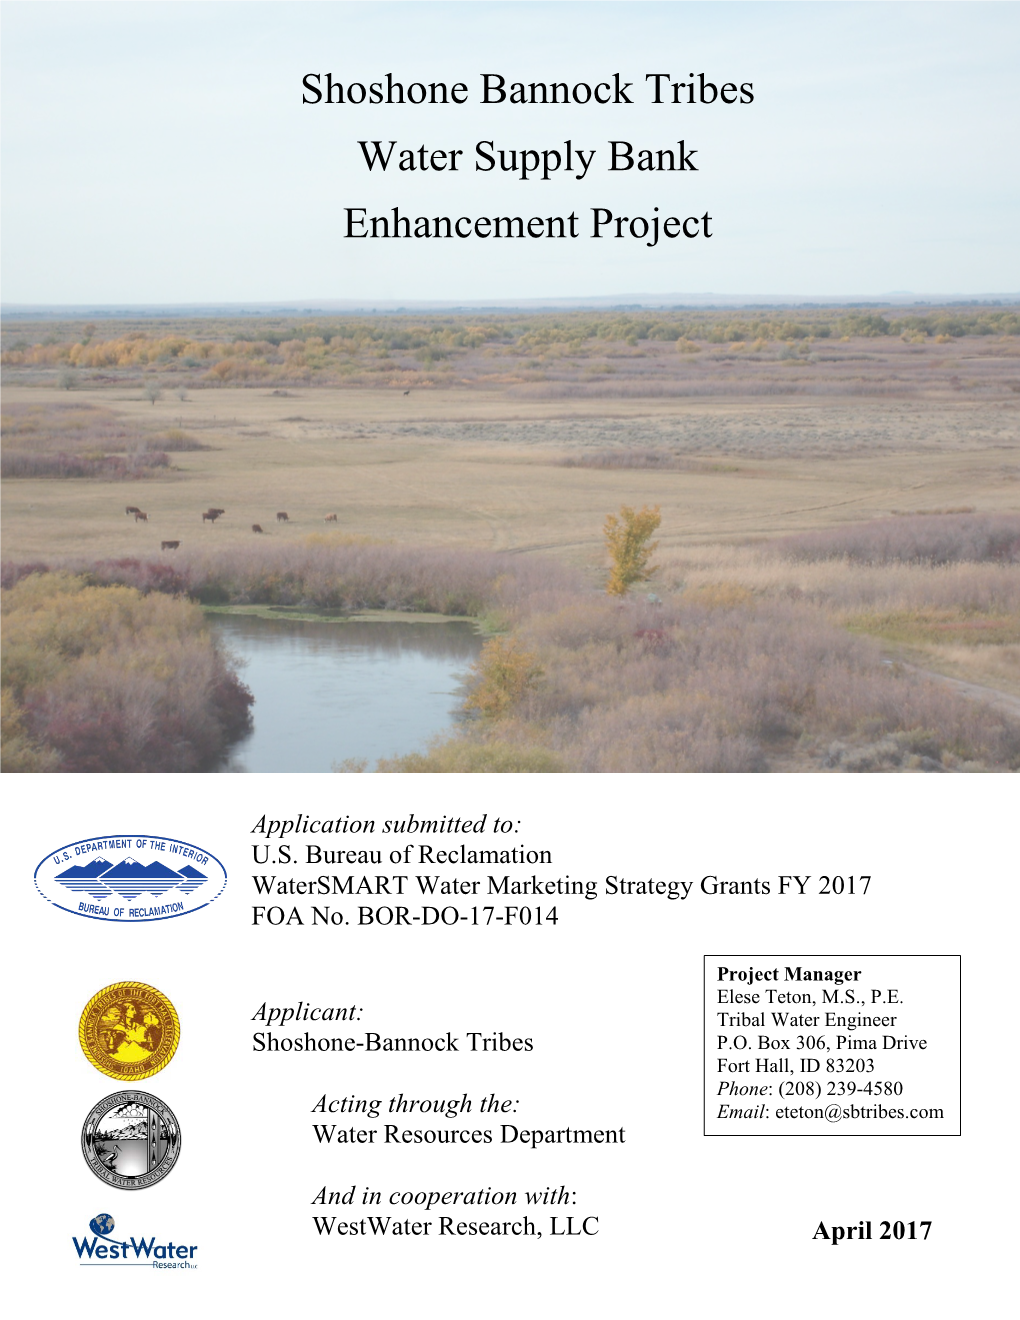 Shoshone Bannock Tribes Water Supply Bank Enhancement Project